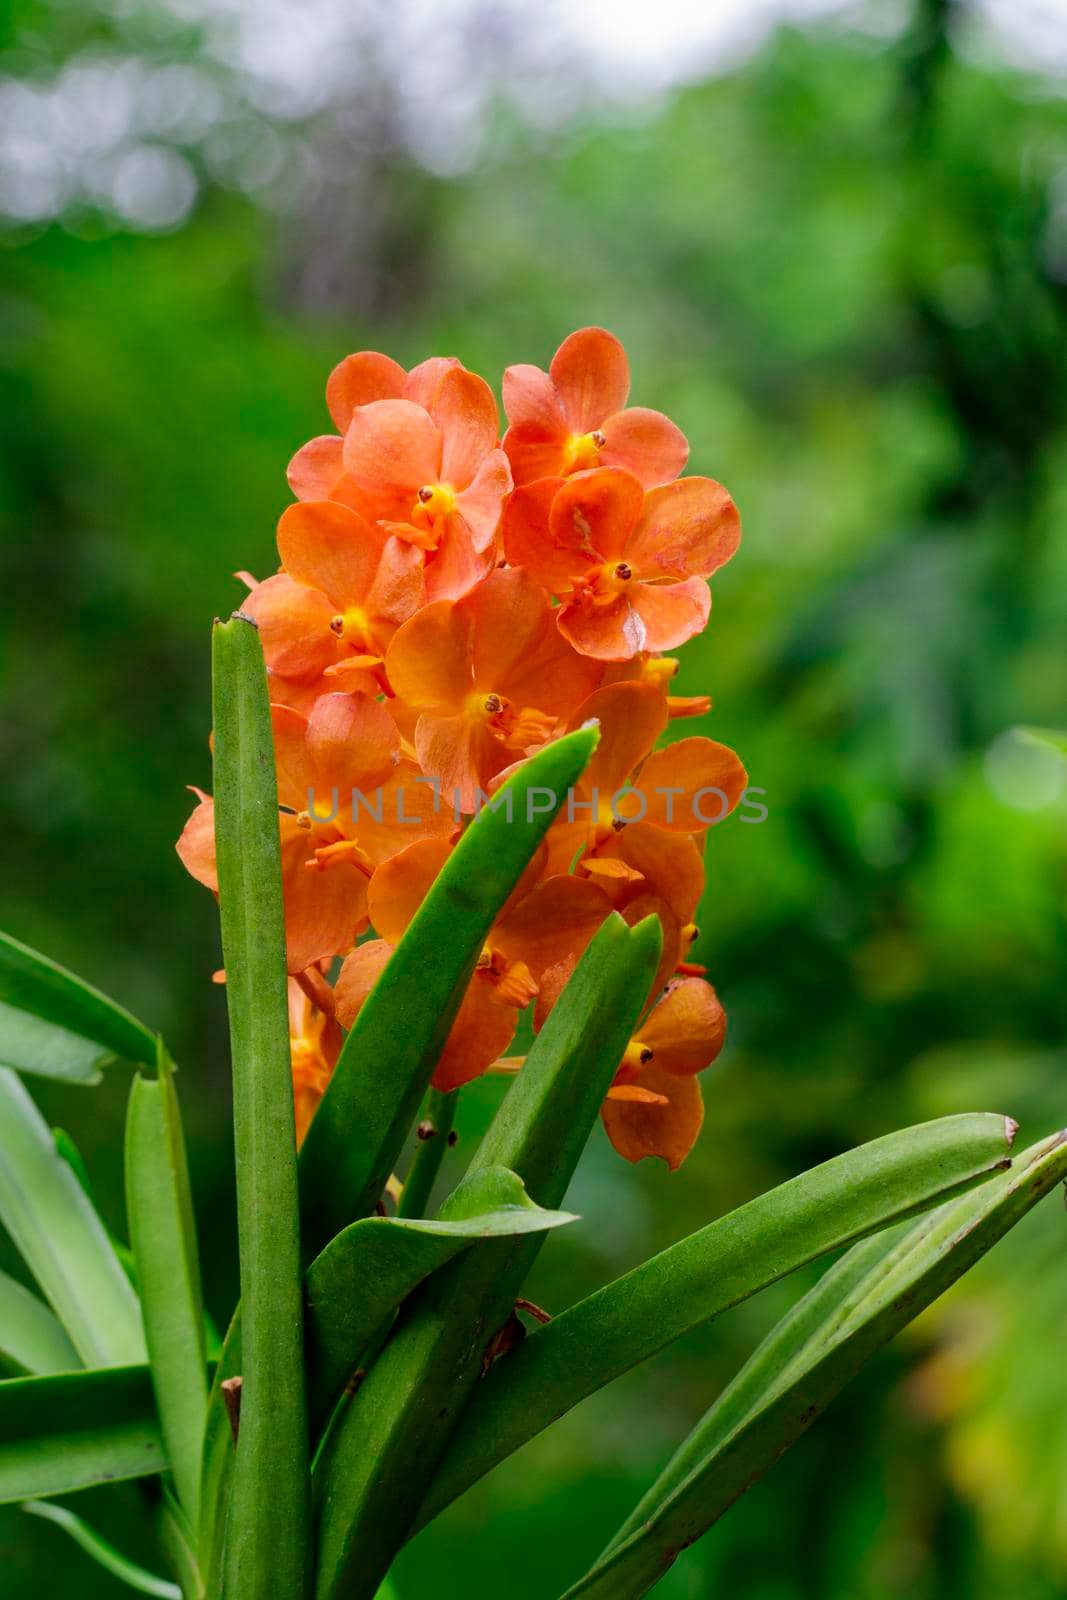 Image of beautiful orange orchid flowers in the garden.